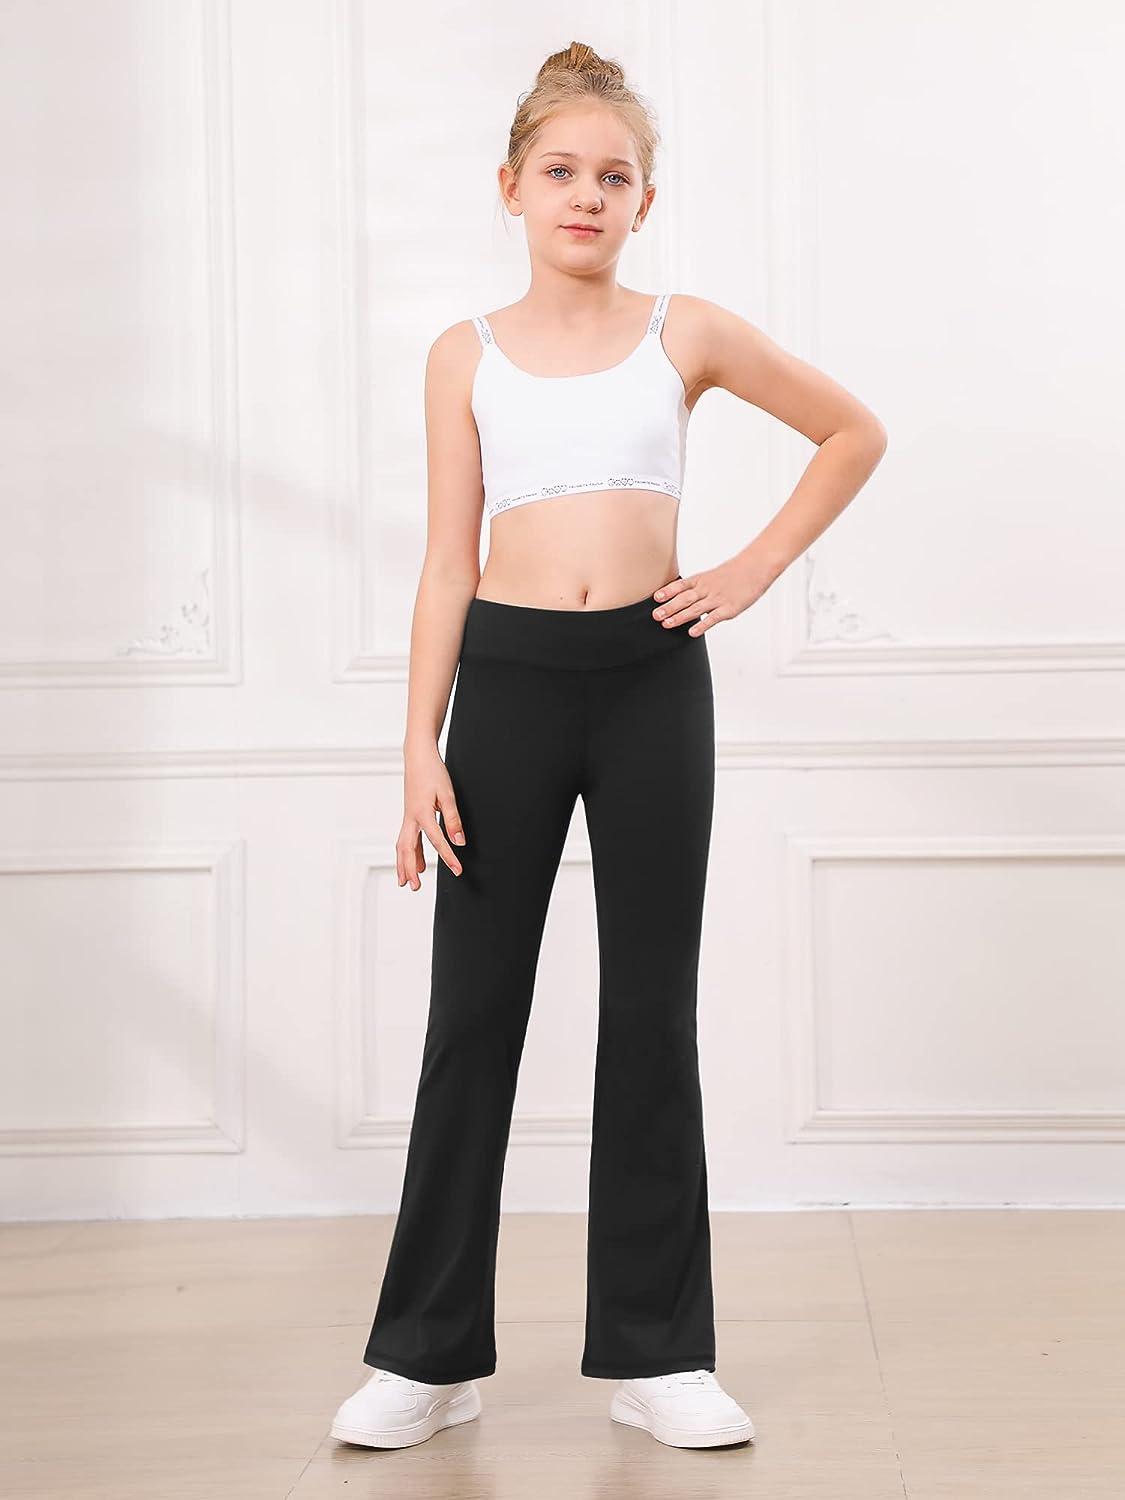 Stelle Girl's Flare Leggings High Waisted Yoga Pants Bootcut Dance Casual  Pants Activewear Kids Bell Bottoms Black 10-11 Years